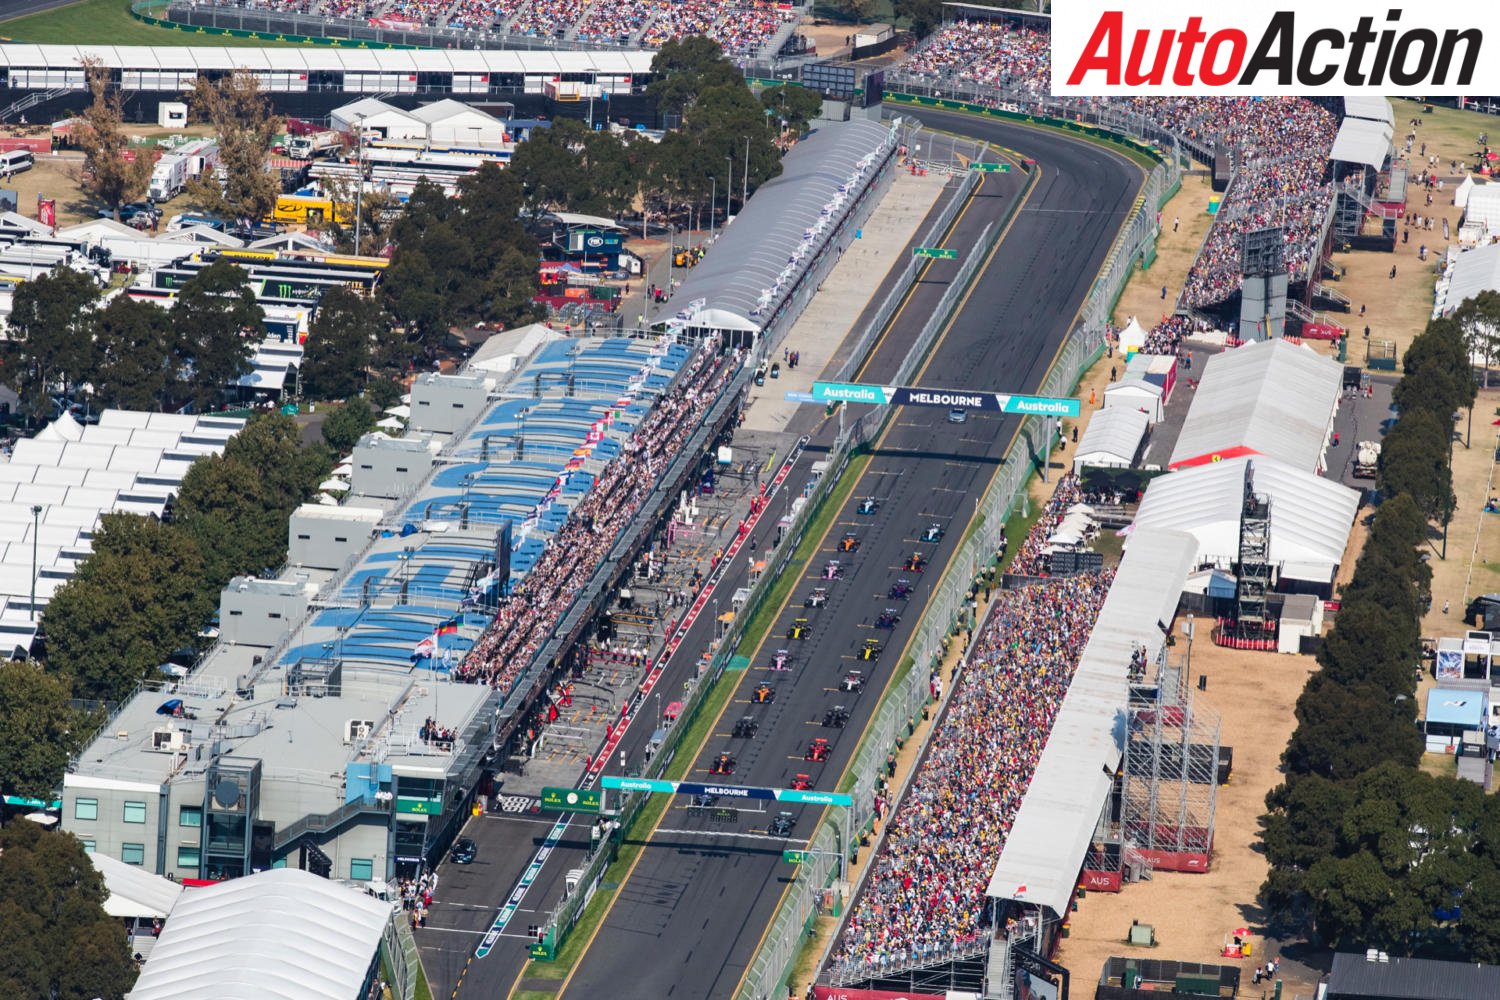 Why the Australian Grand Prix can't happen this year - Image: Motorsport Images